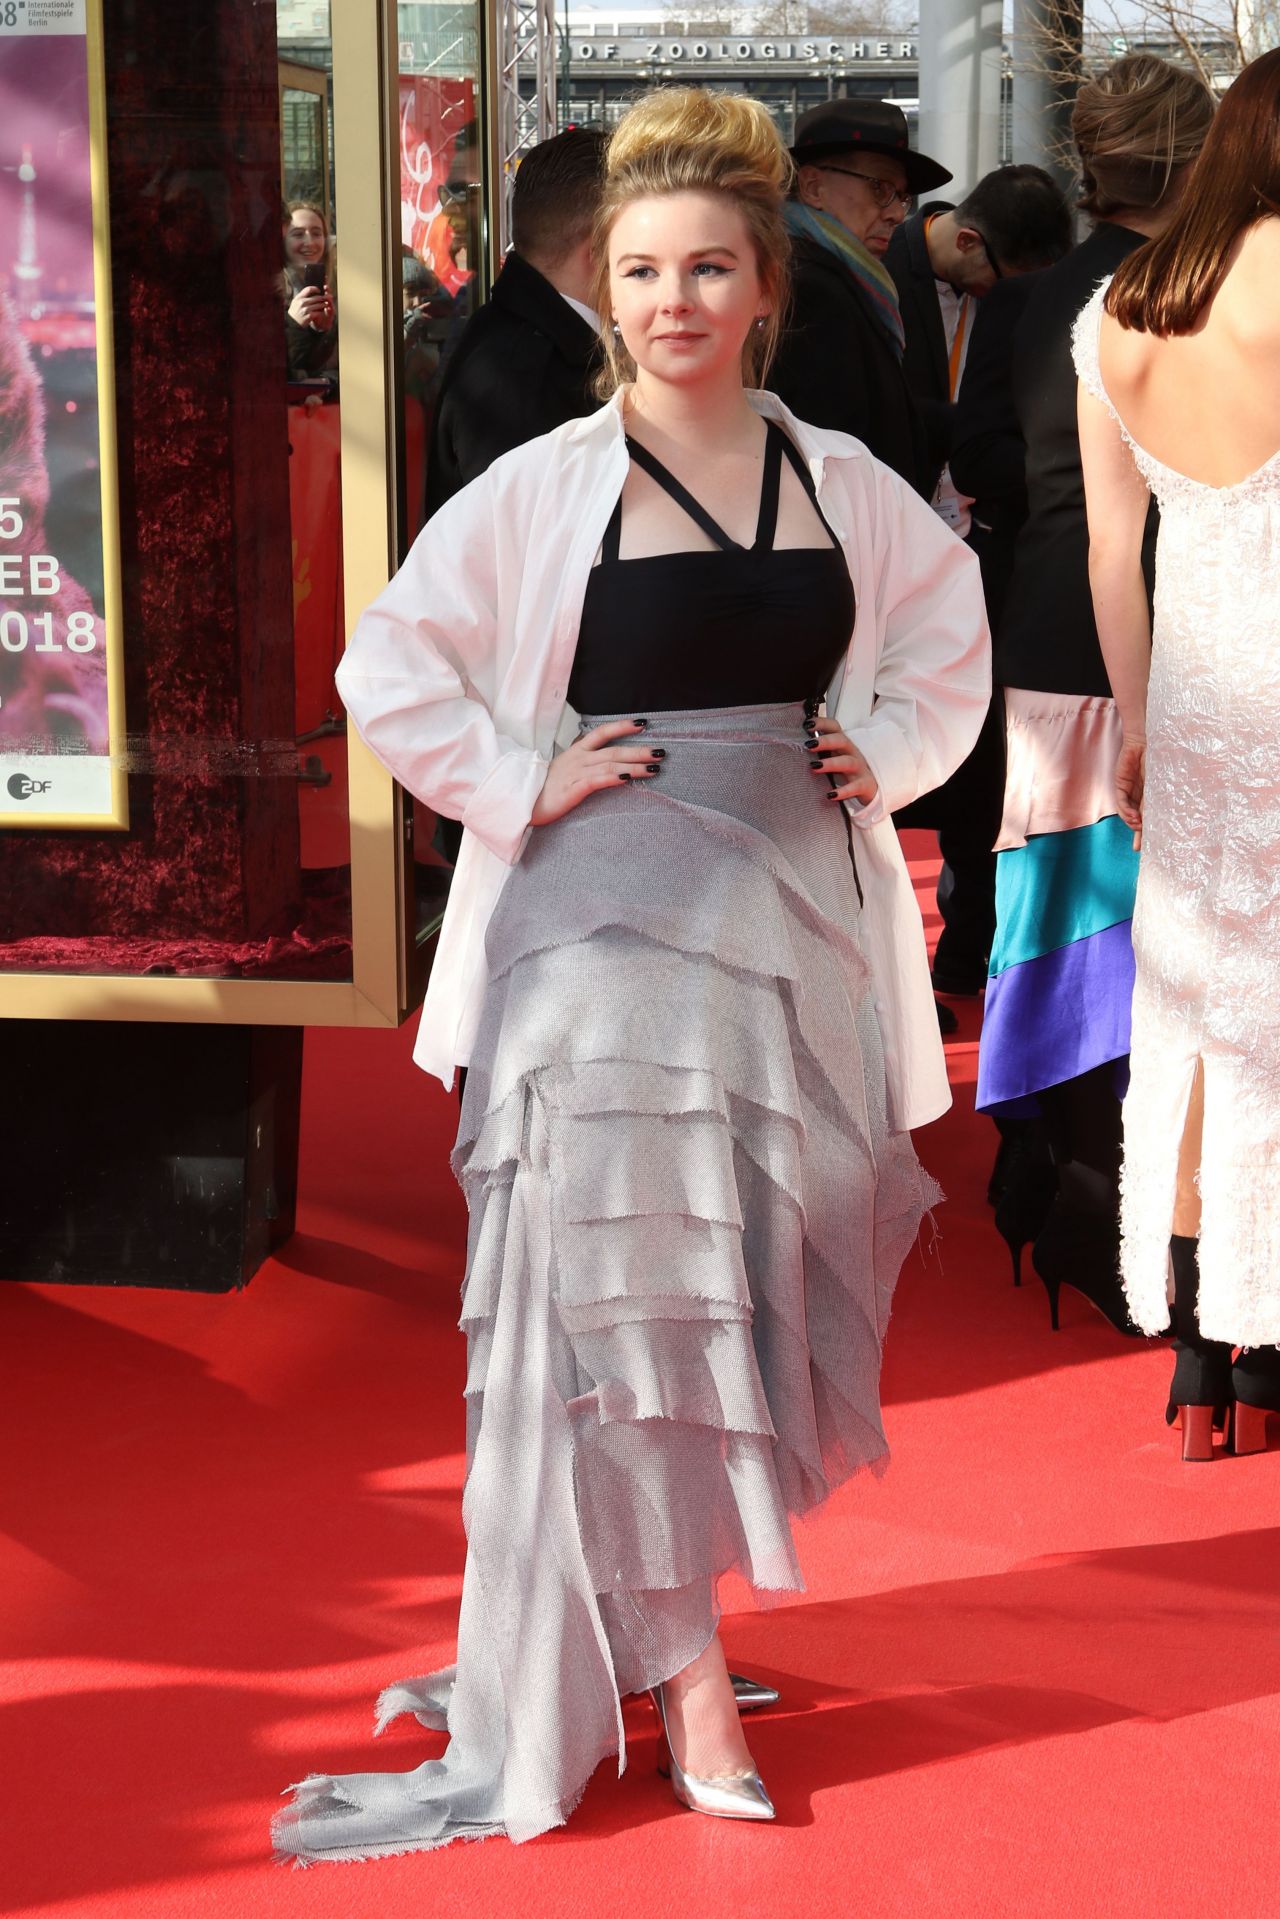 Ruby Rees Wemyss - "Picnic At Hanging Rock" Premiere at Berlinale...